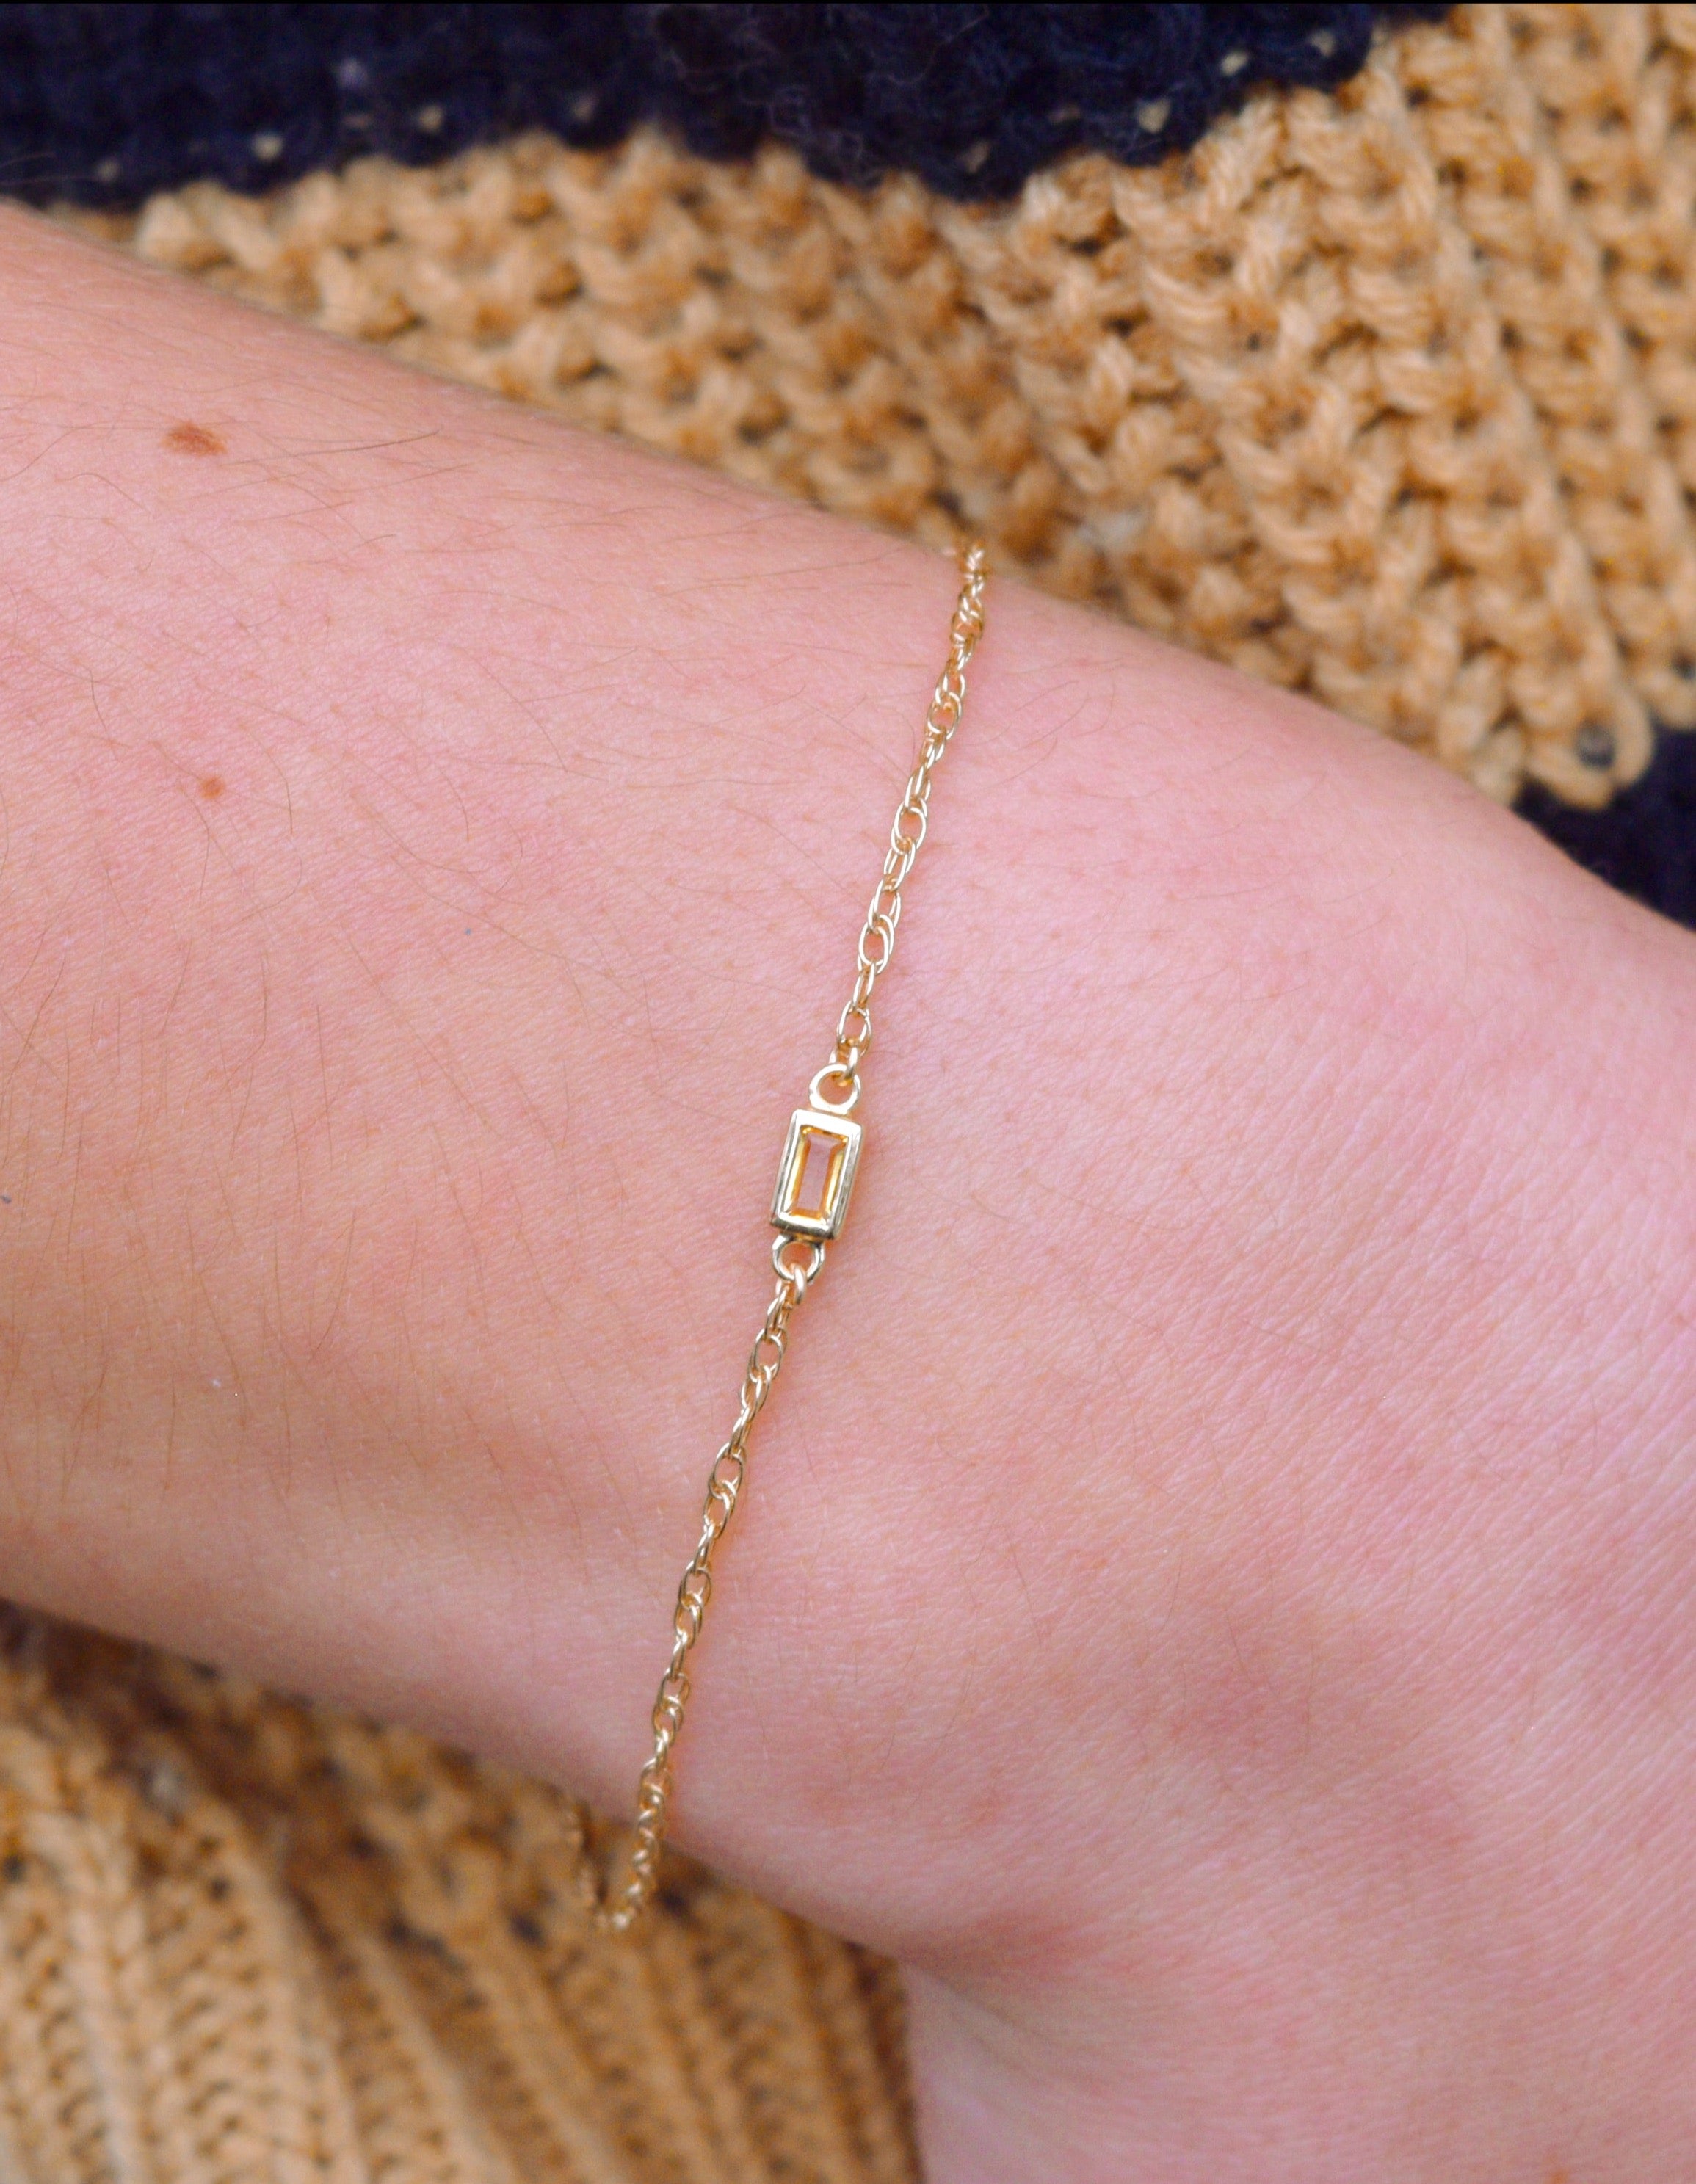 Baguette Charms in 14kt Gold